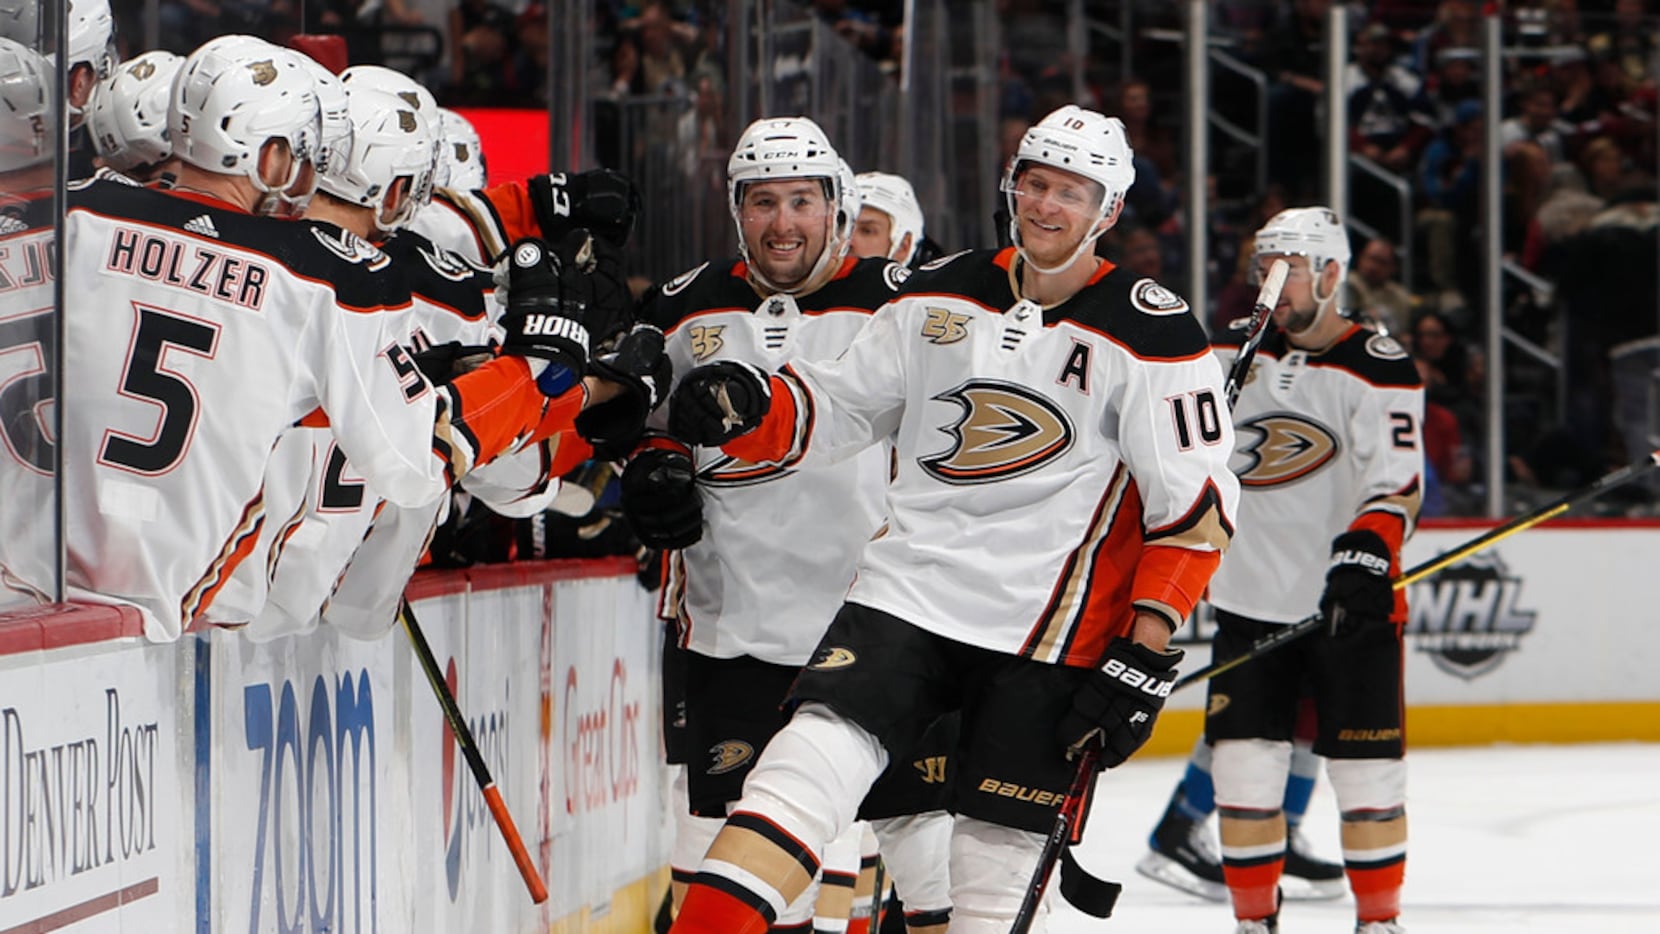 Top 10 Best Anaheim Ducks Players of All Time